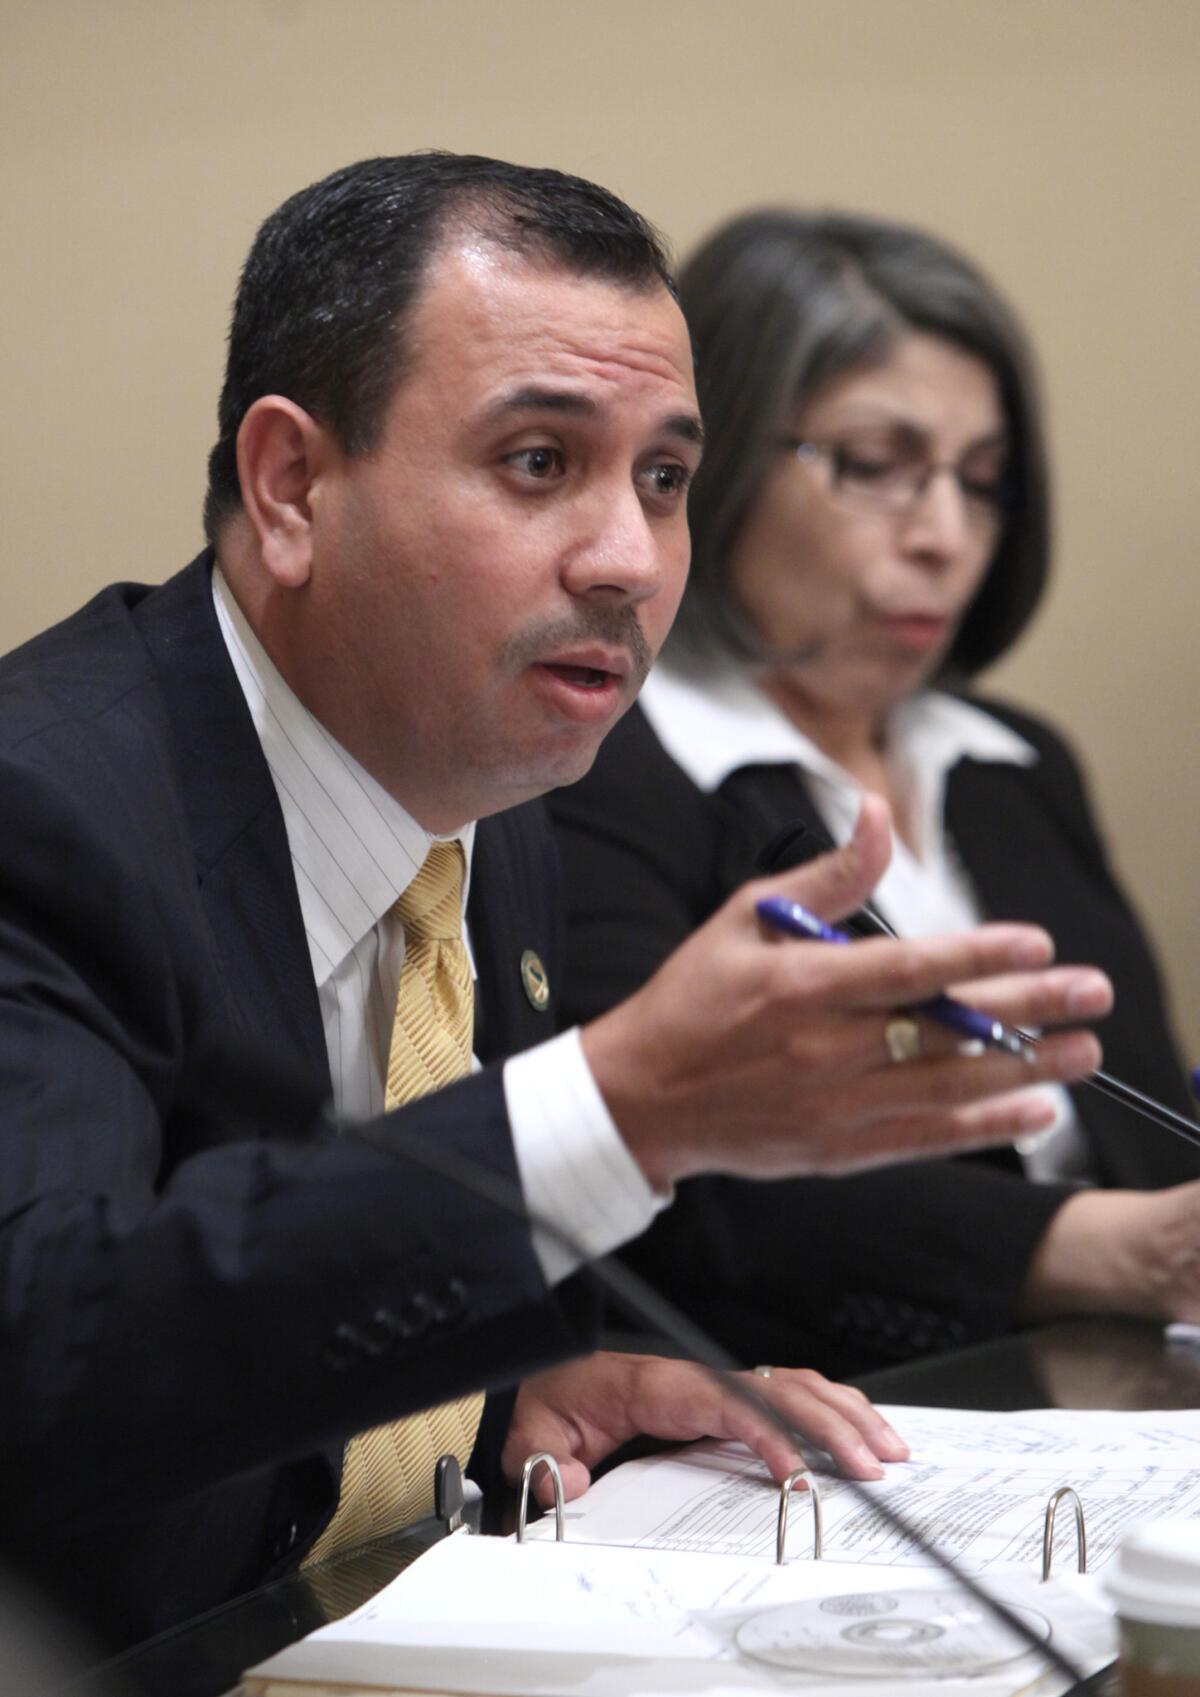 Sen. Tony Mendoza (D-Artesia) was suspended Monday from leadership positions pending an investigation into allegations of sexual harassment.